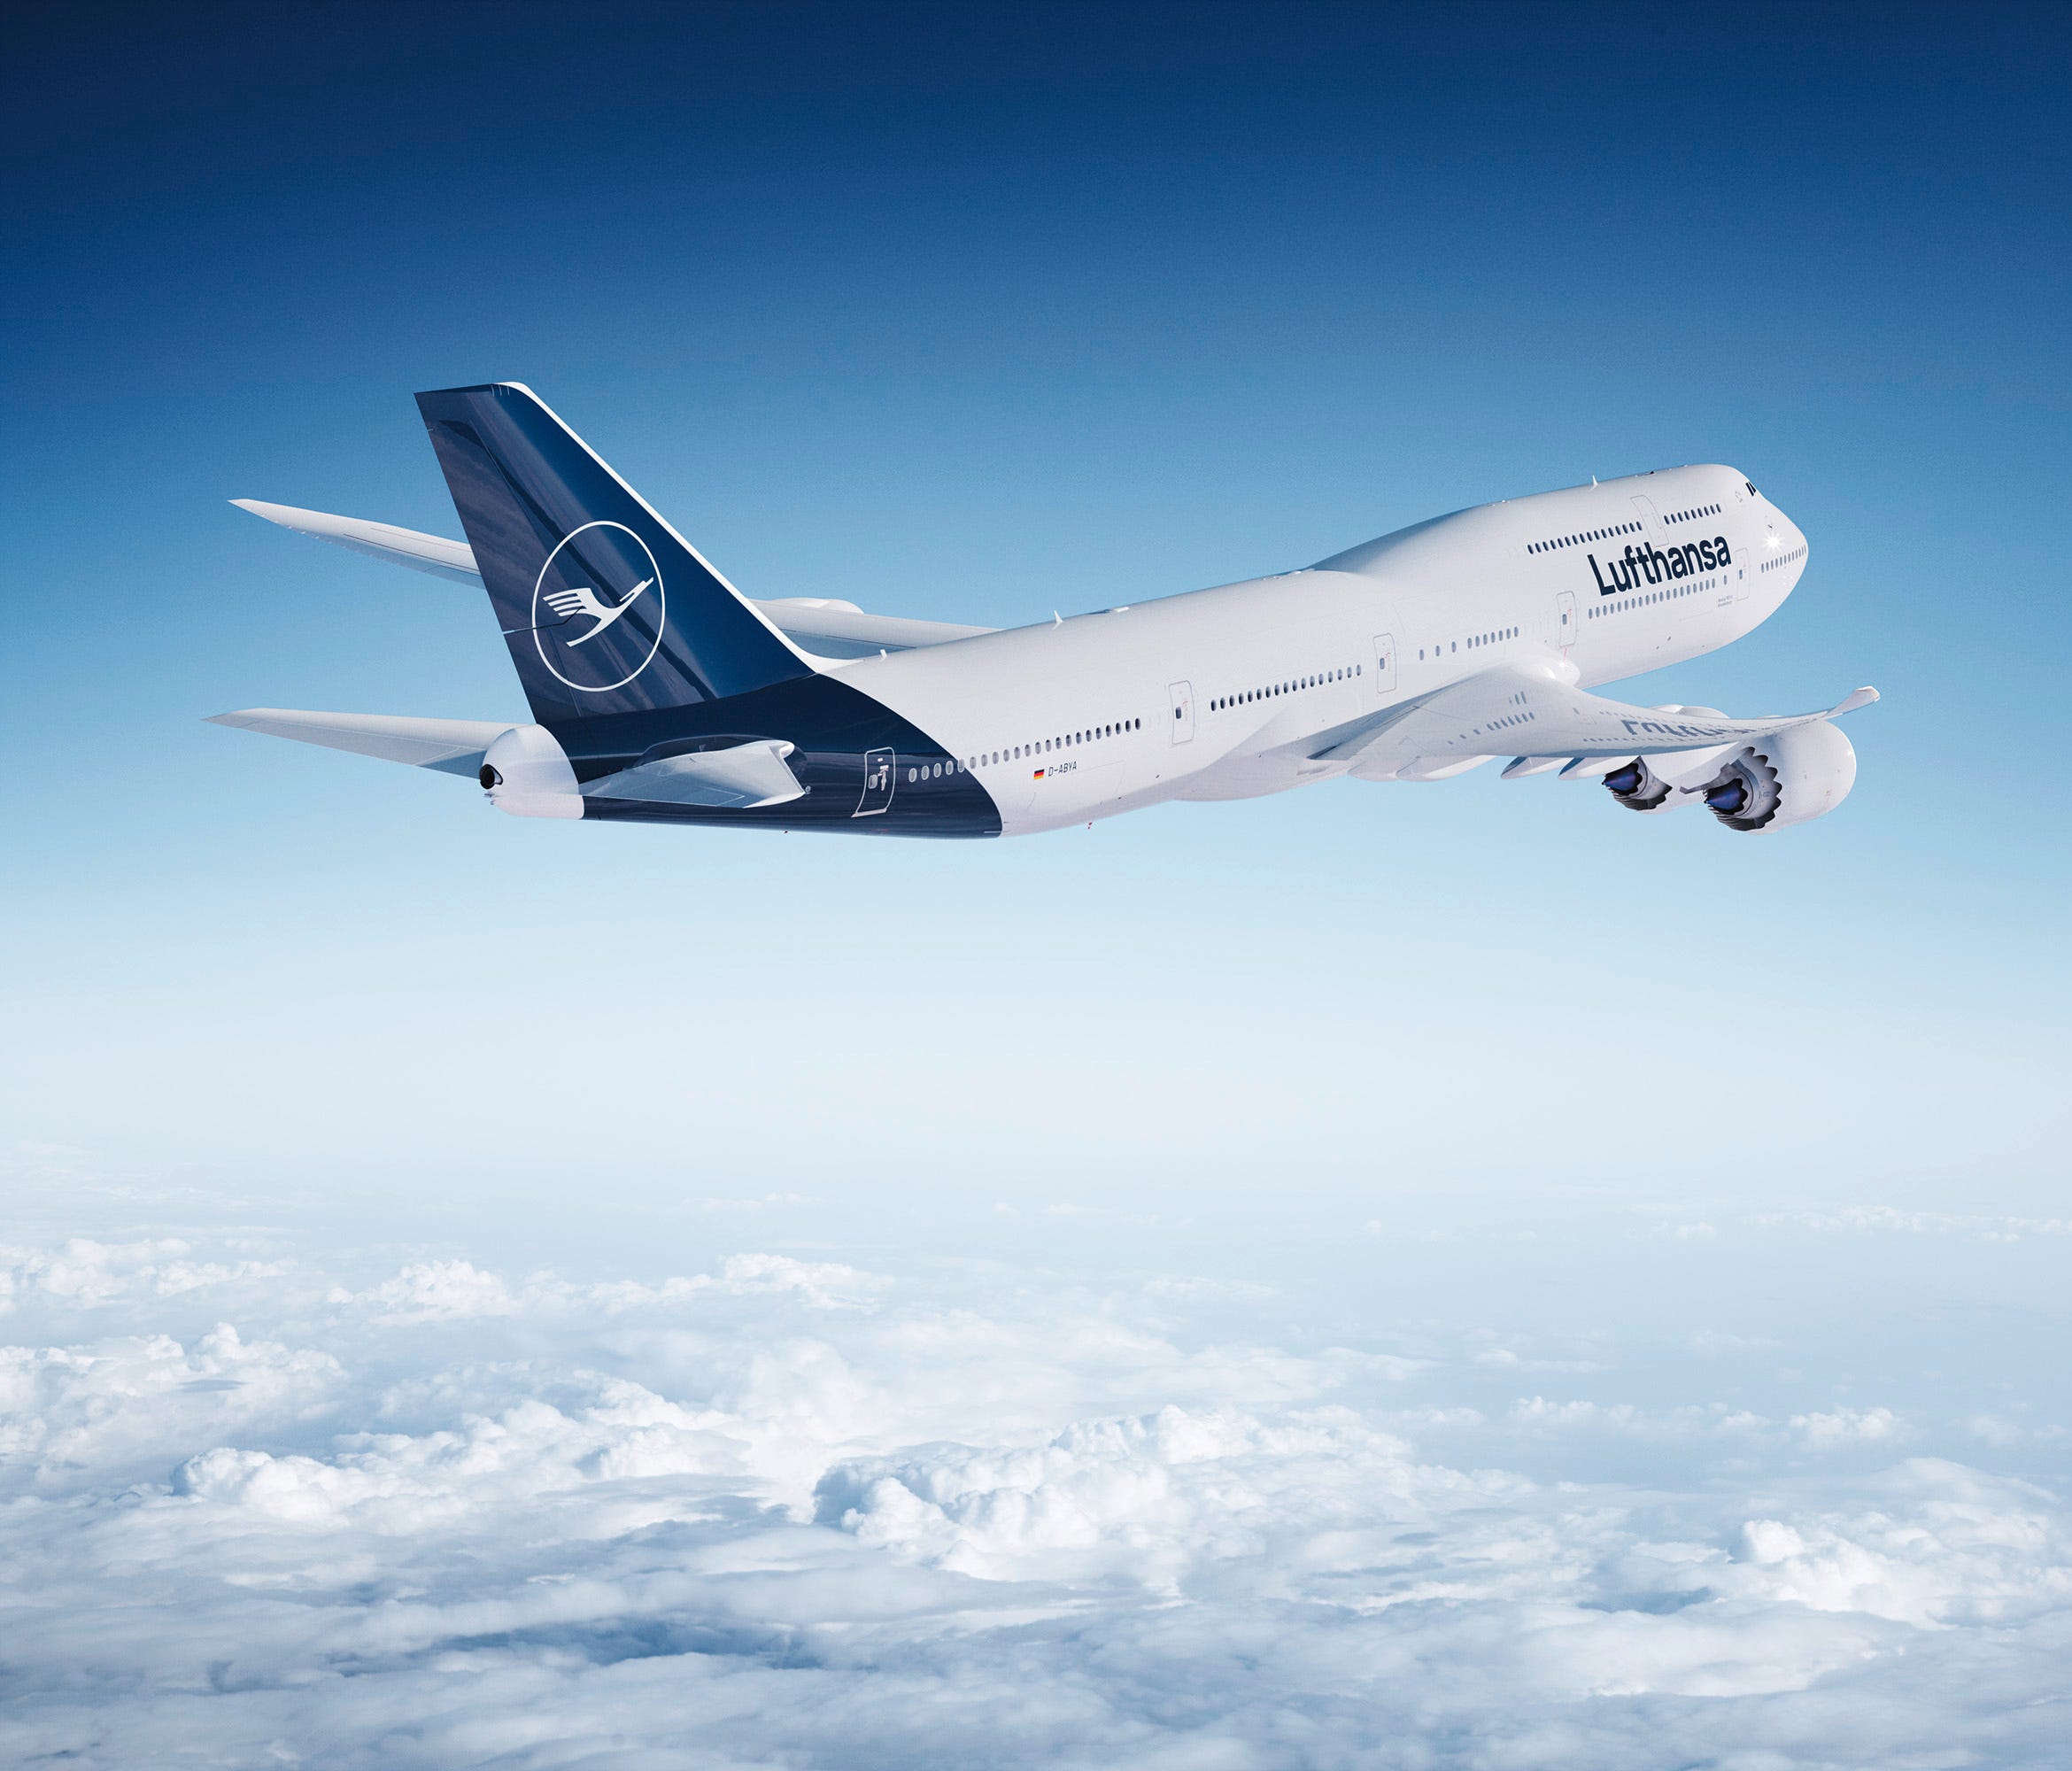 This image provided by Lufthansa shows its new paint scheme on one of its Boeing 747 aircraft.